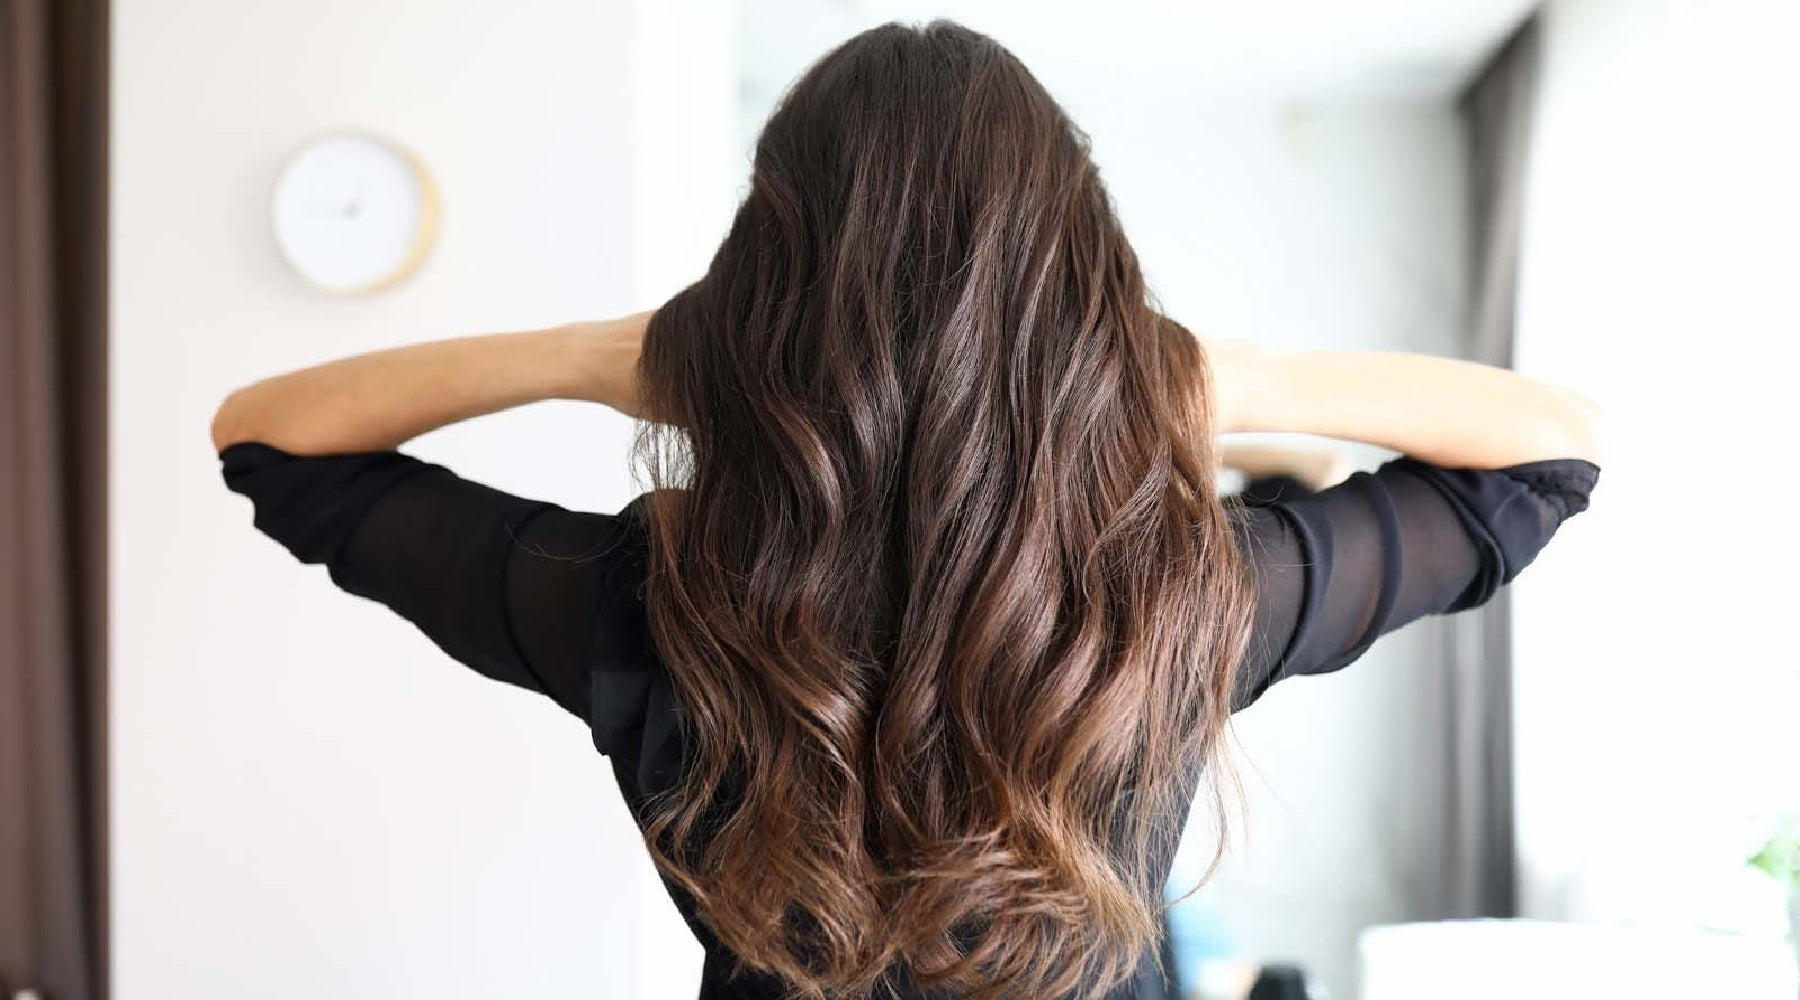 Get Your Hair Winter-Ready for Healthy, Lustrous Locks